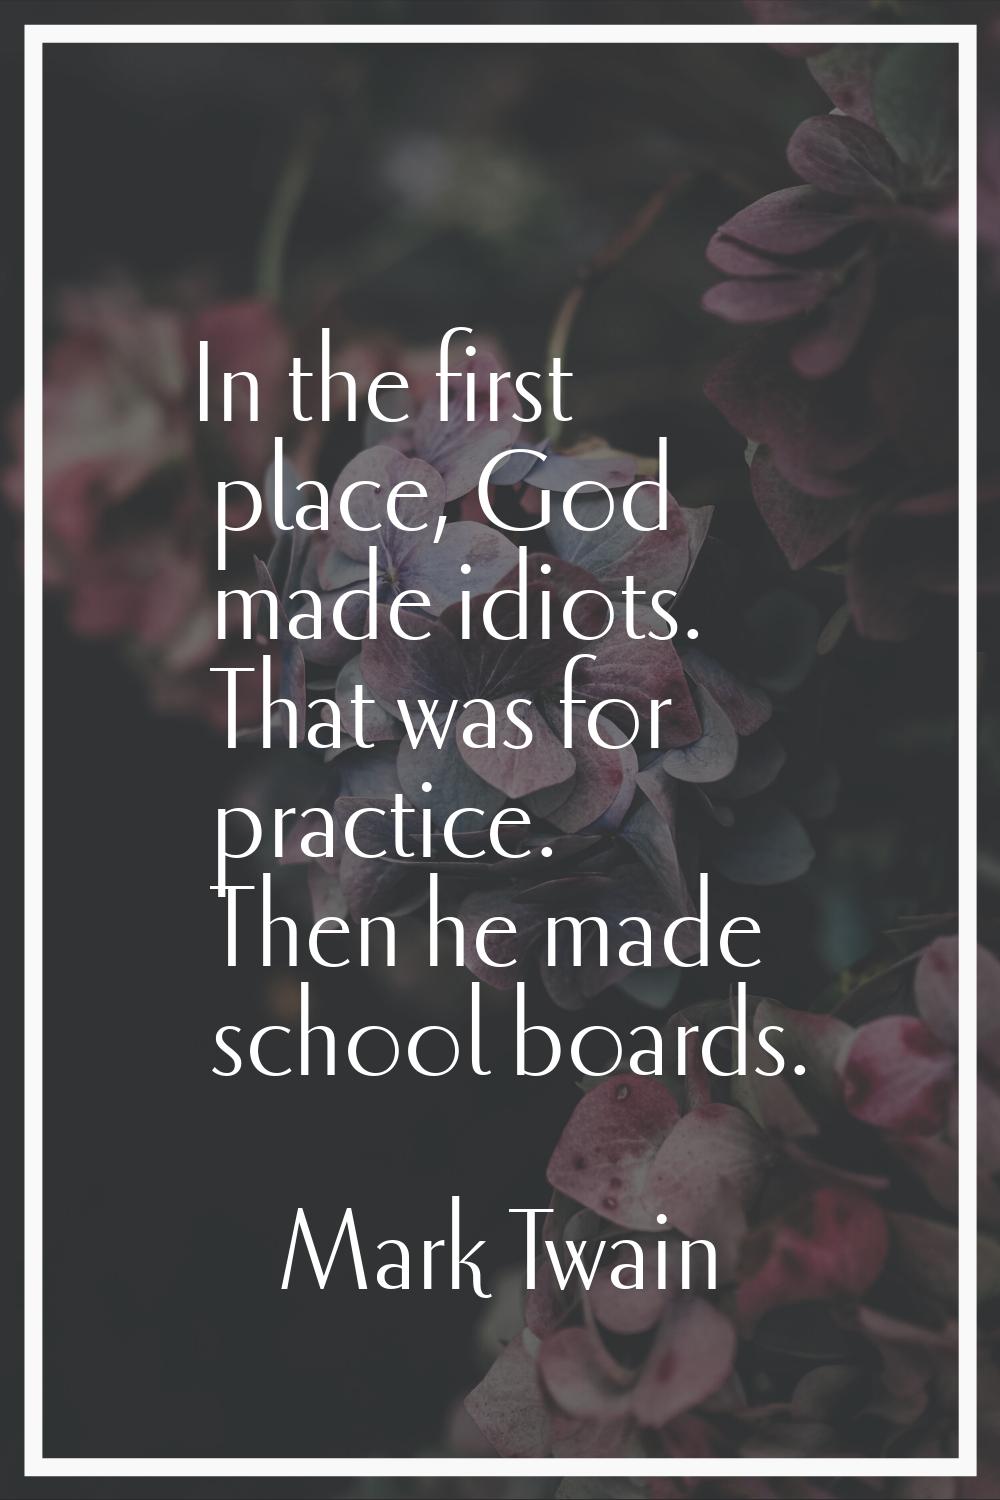 In the first place, God made idiots. That was for practice. Then he made school boards.